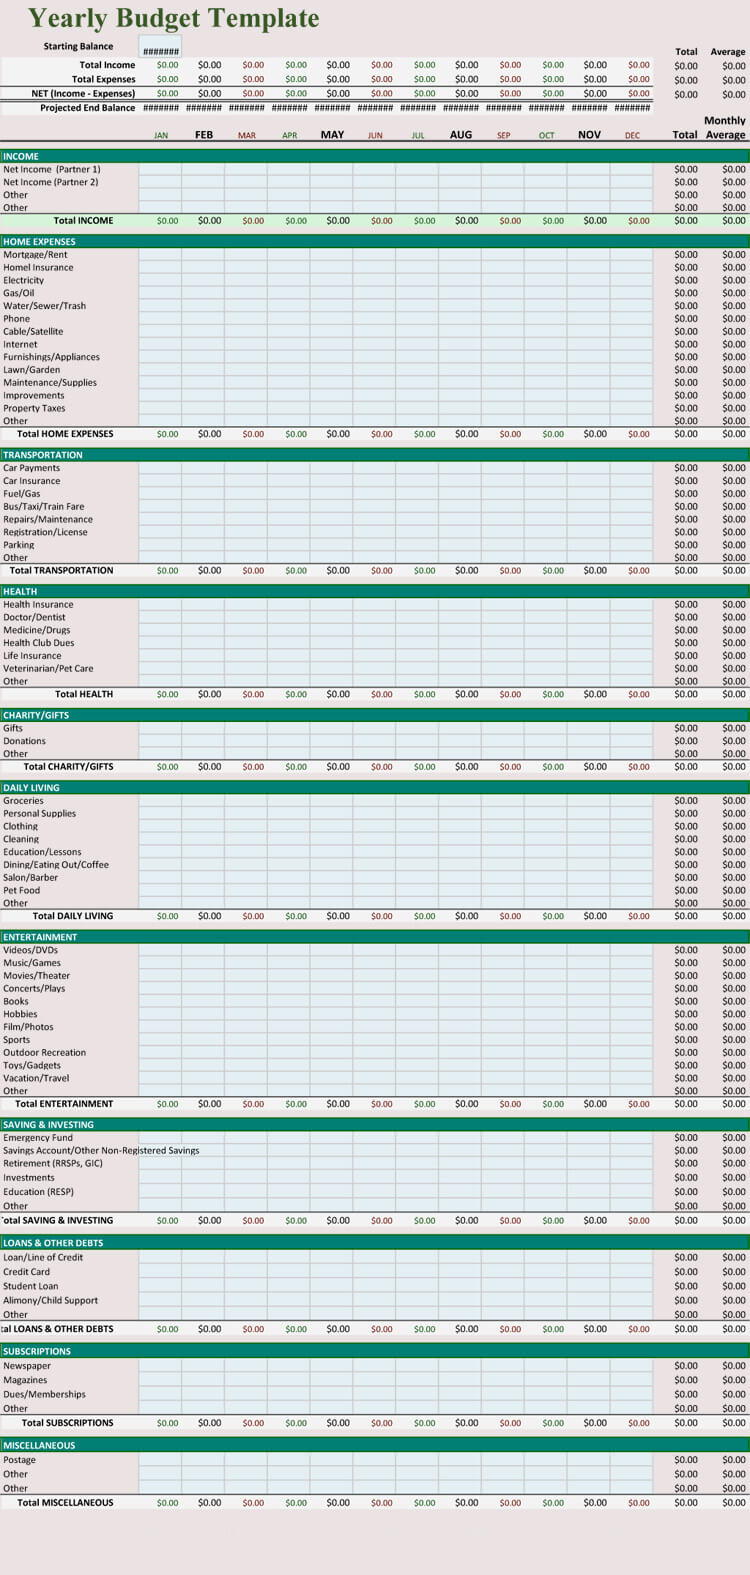 5 Free Personal Yearly Budget Templates For Excel